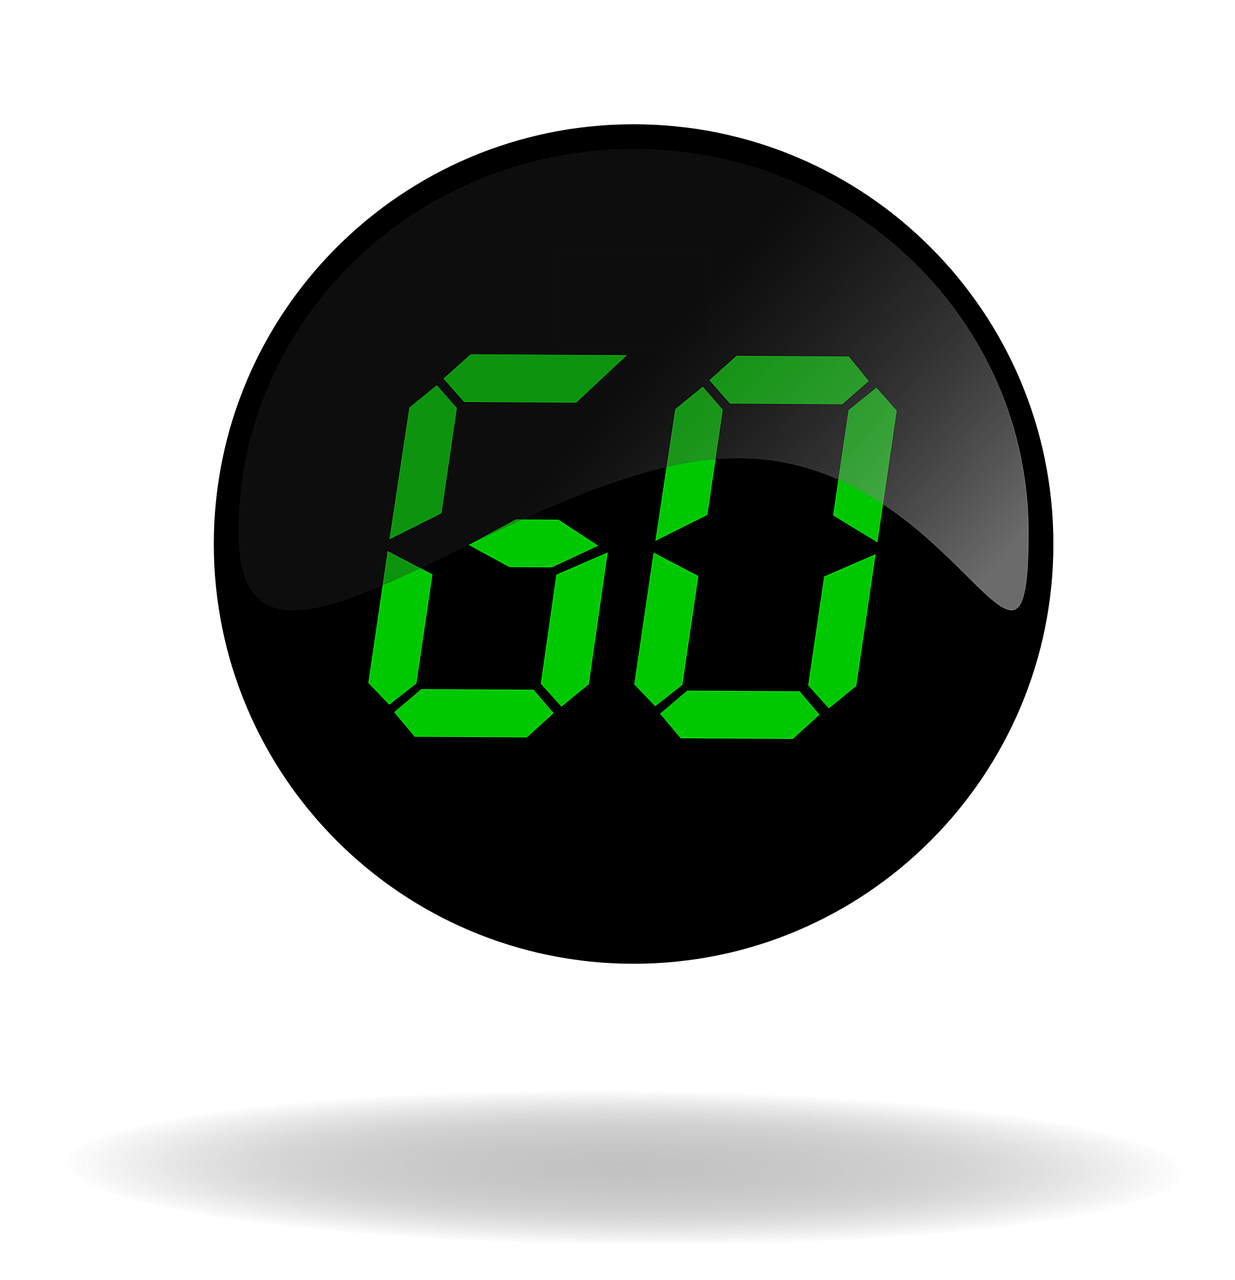 Go,go button black and green,button,web,internet - free image from ...